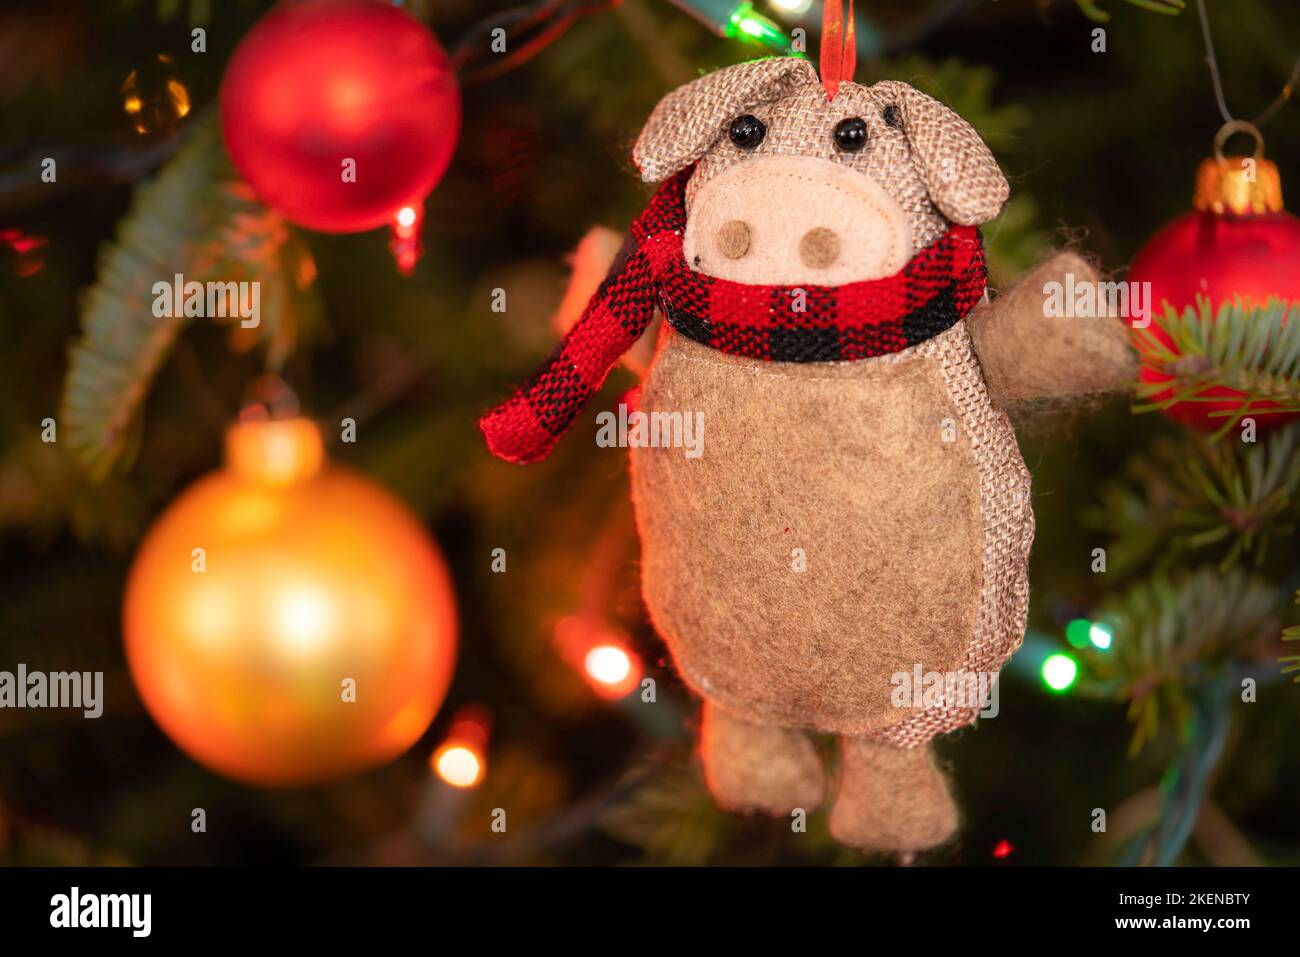 Pig themed Christmas ornament hanging in the tree. Stock Photo